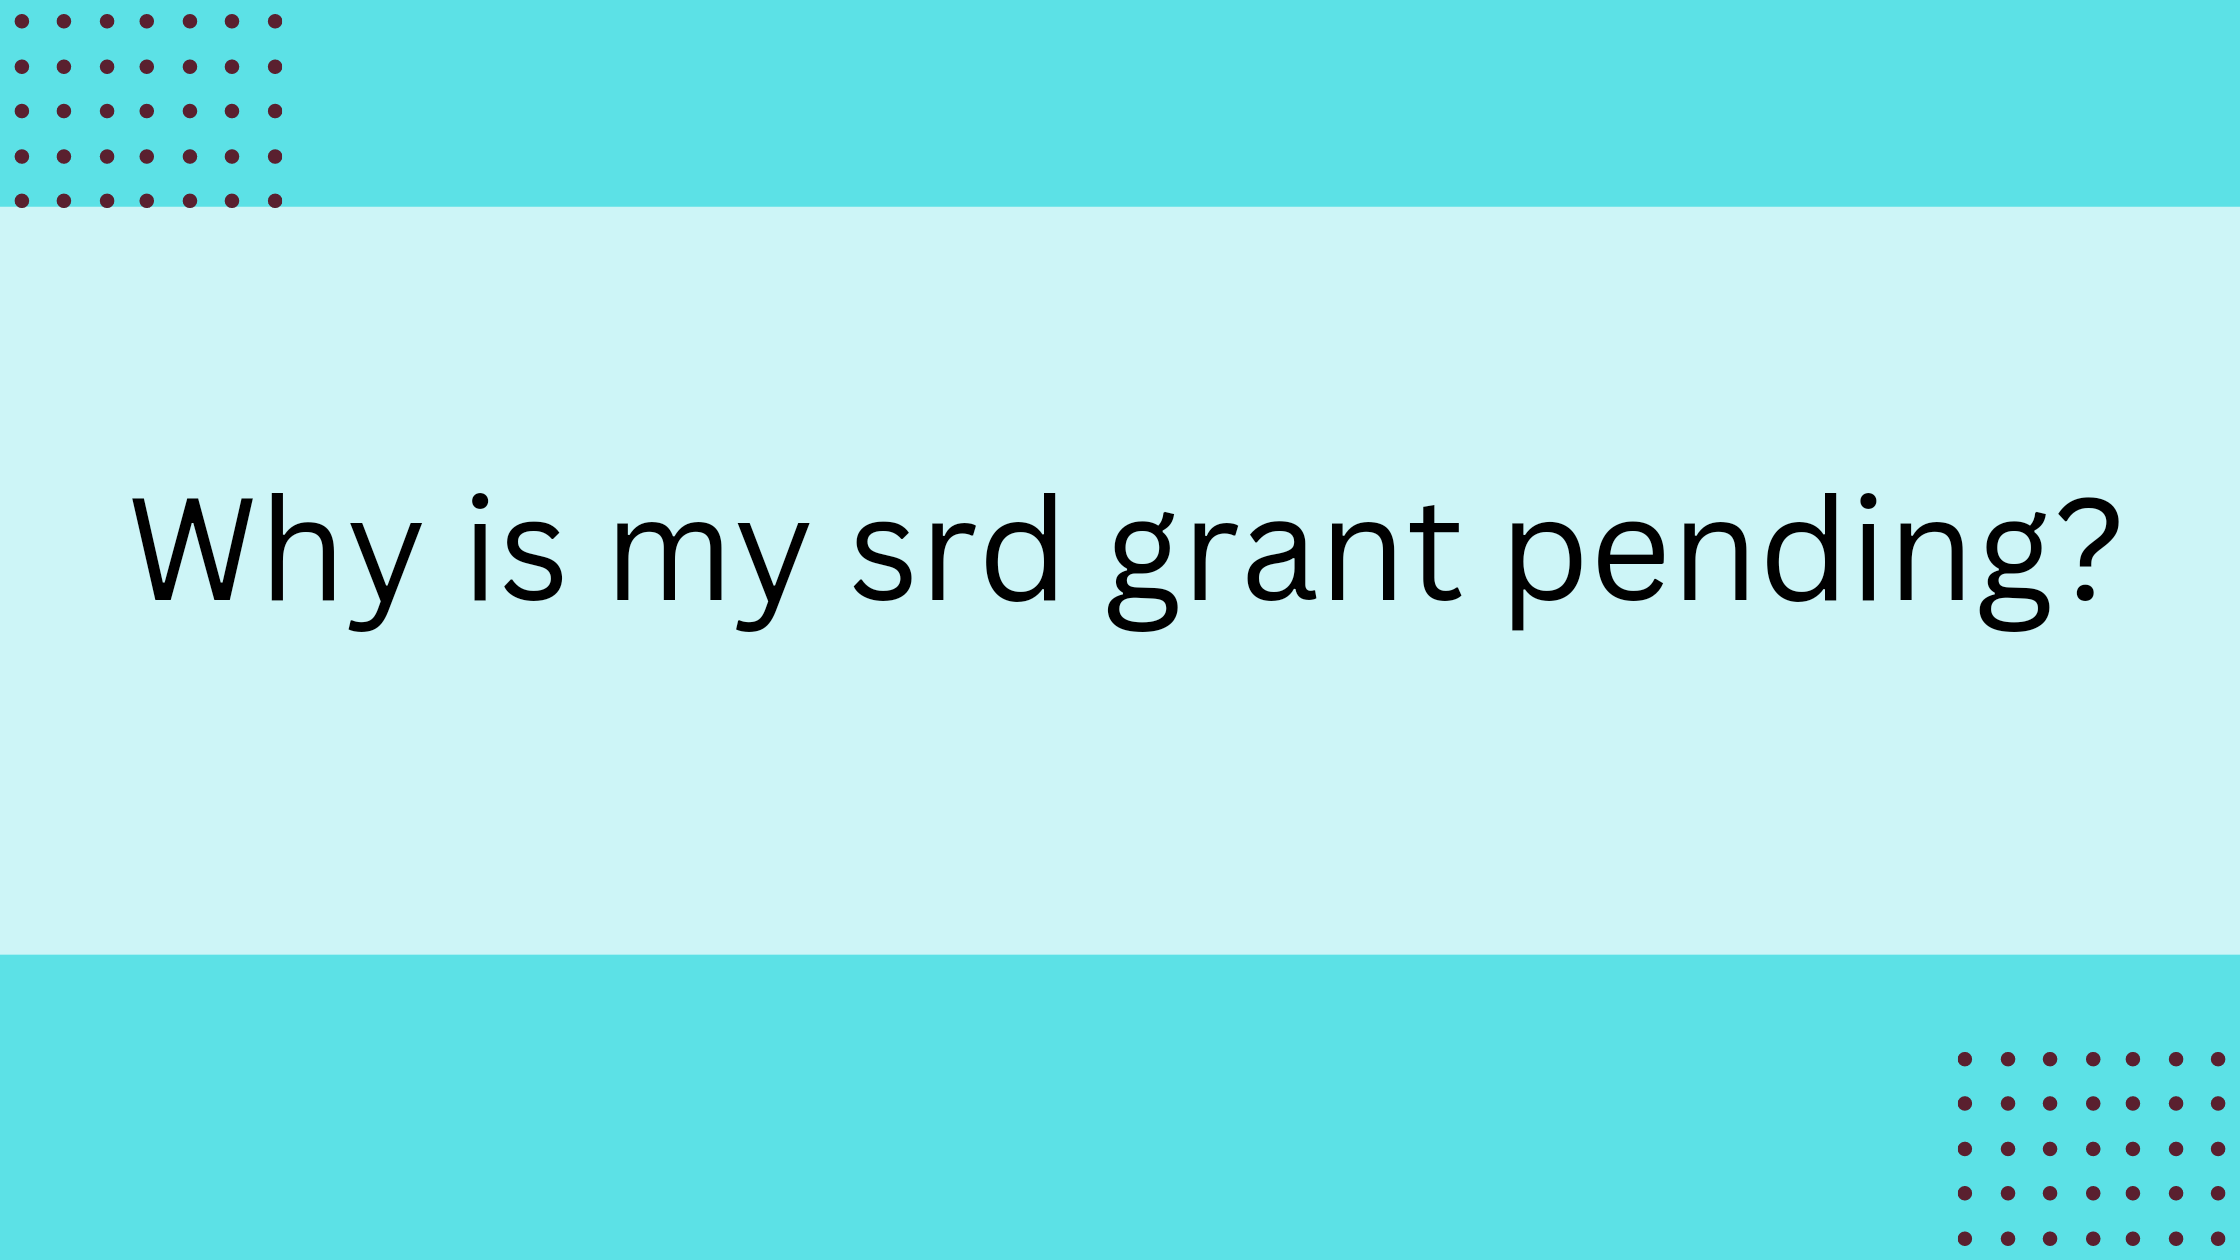 Why is my srd grant pending